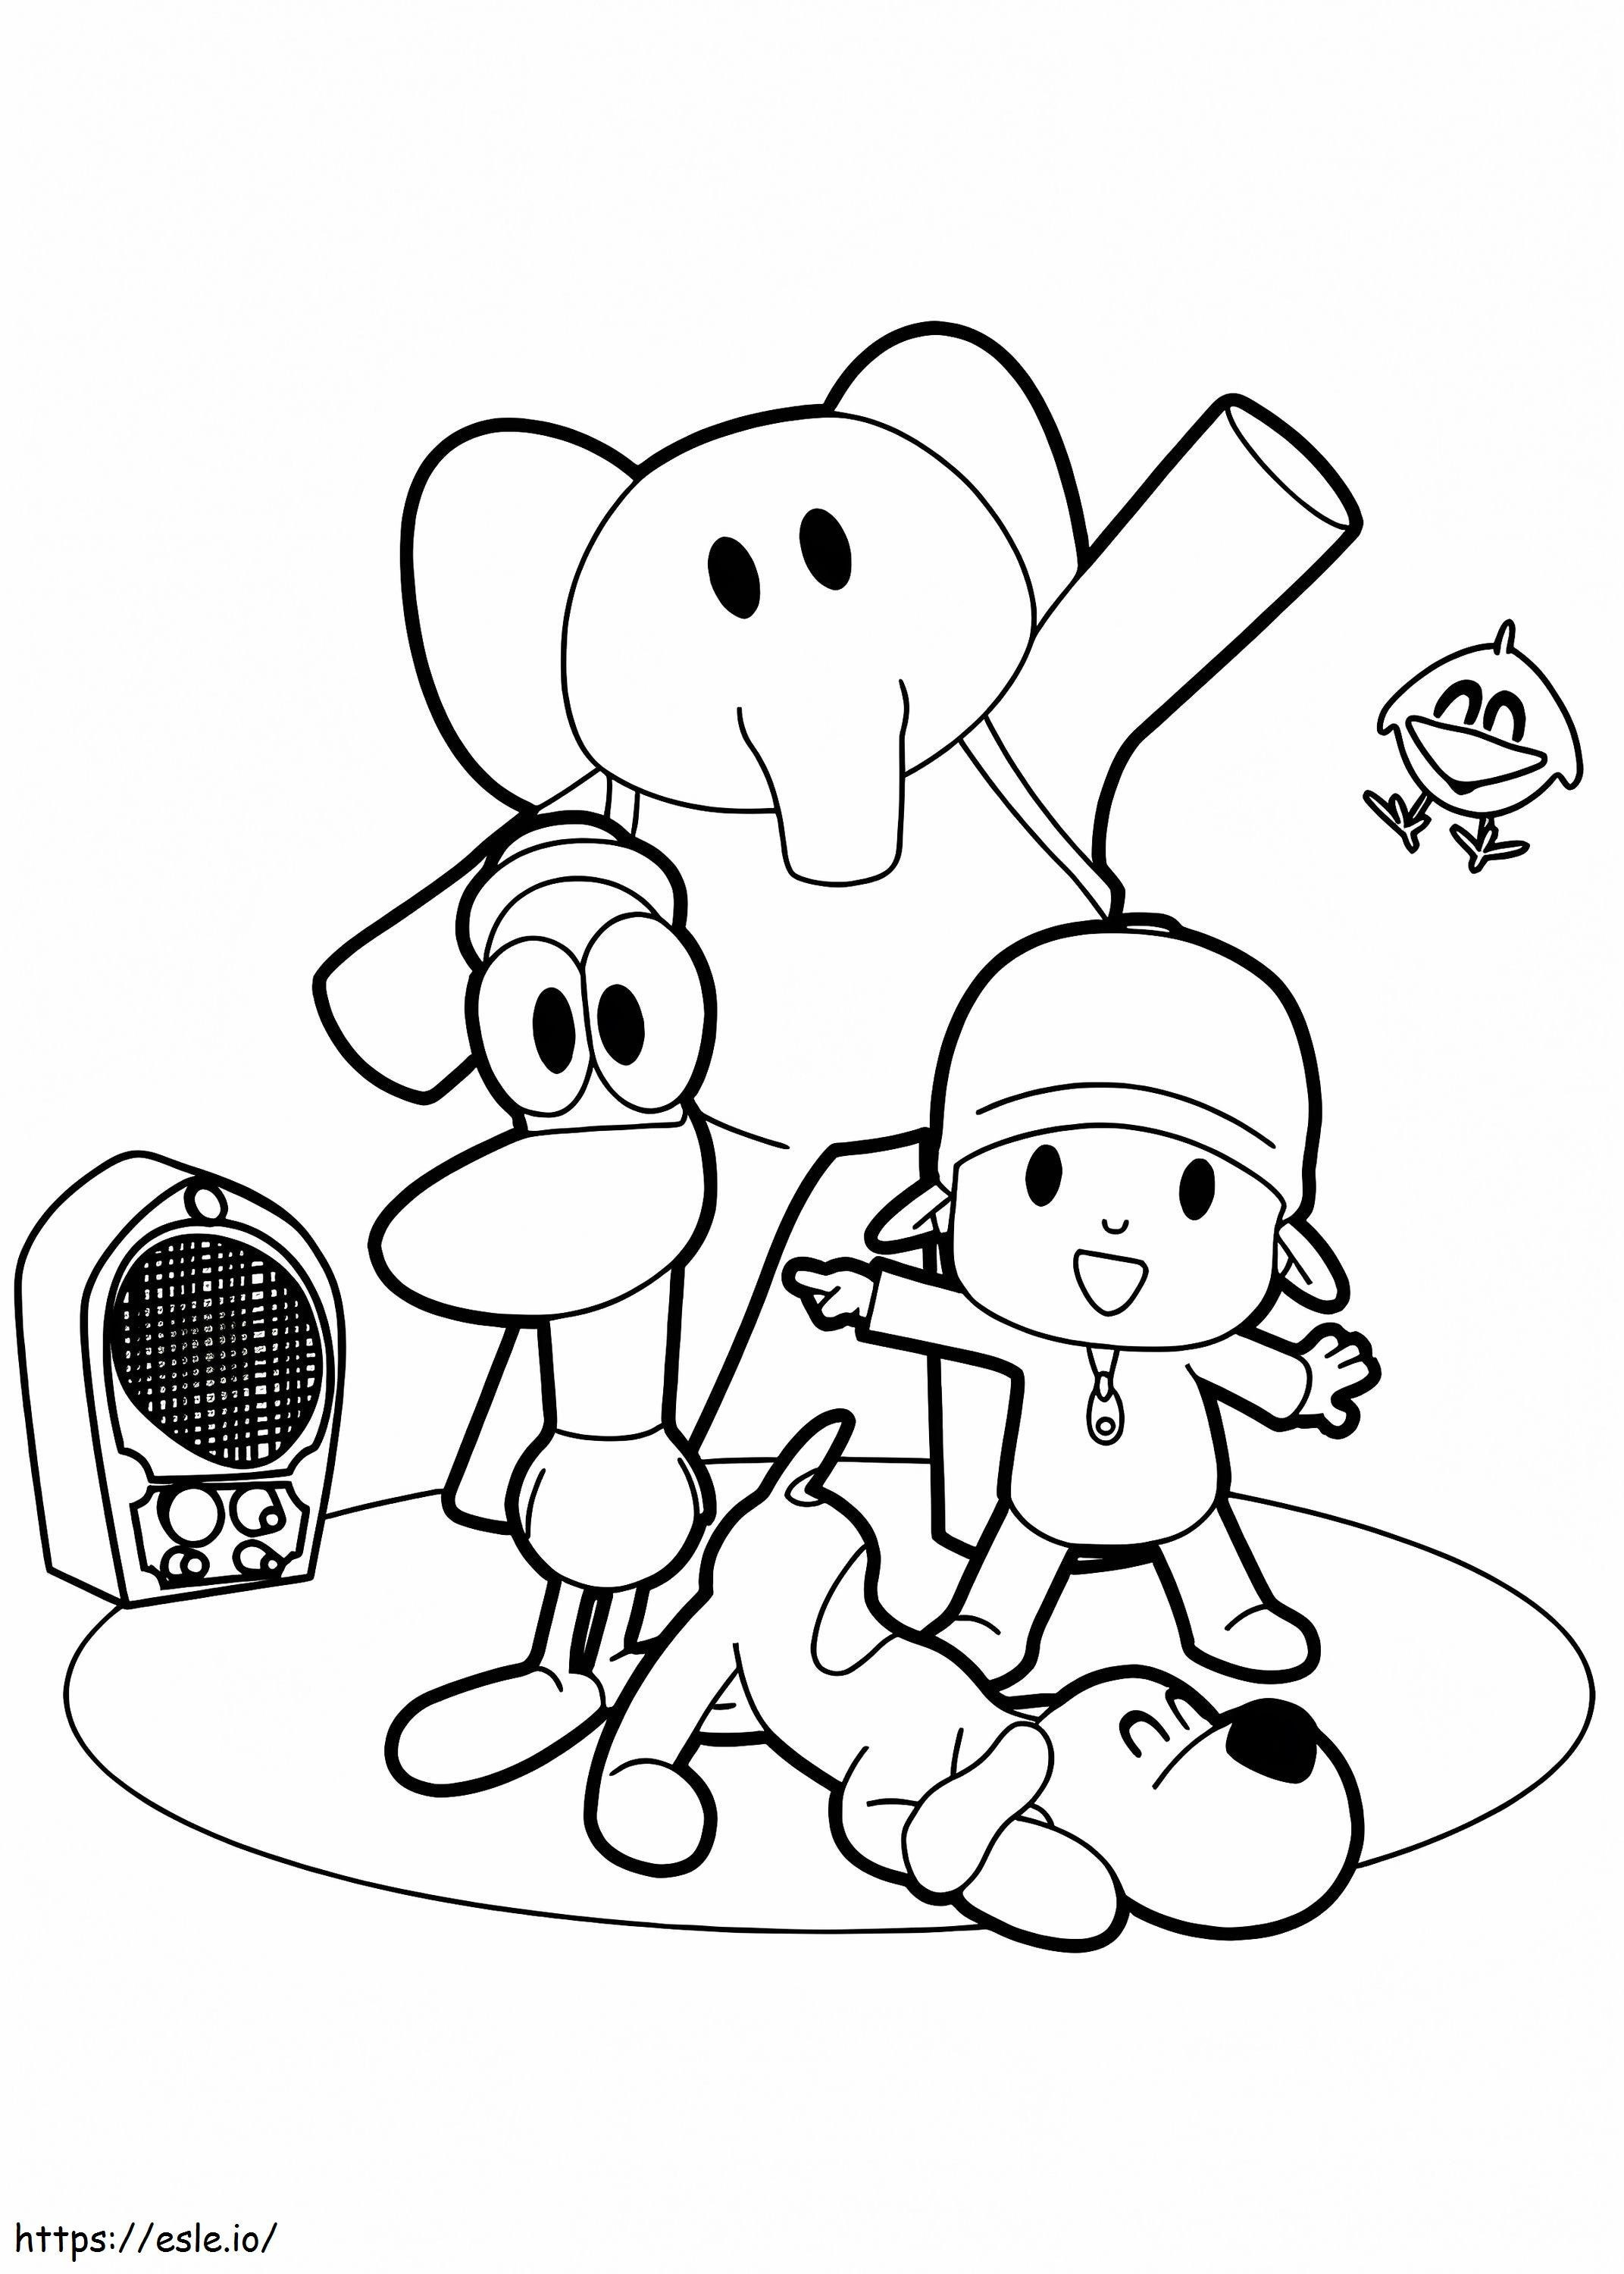 Pocoyo Dances While Listening To Music From The Radio coloring page